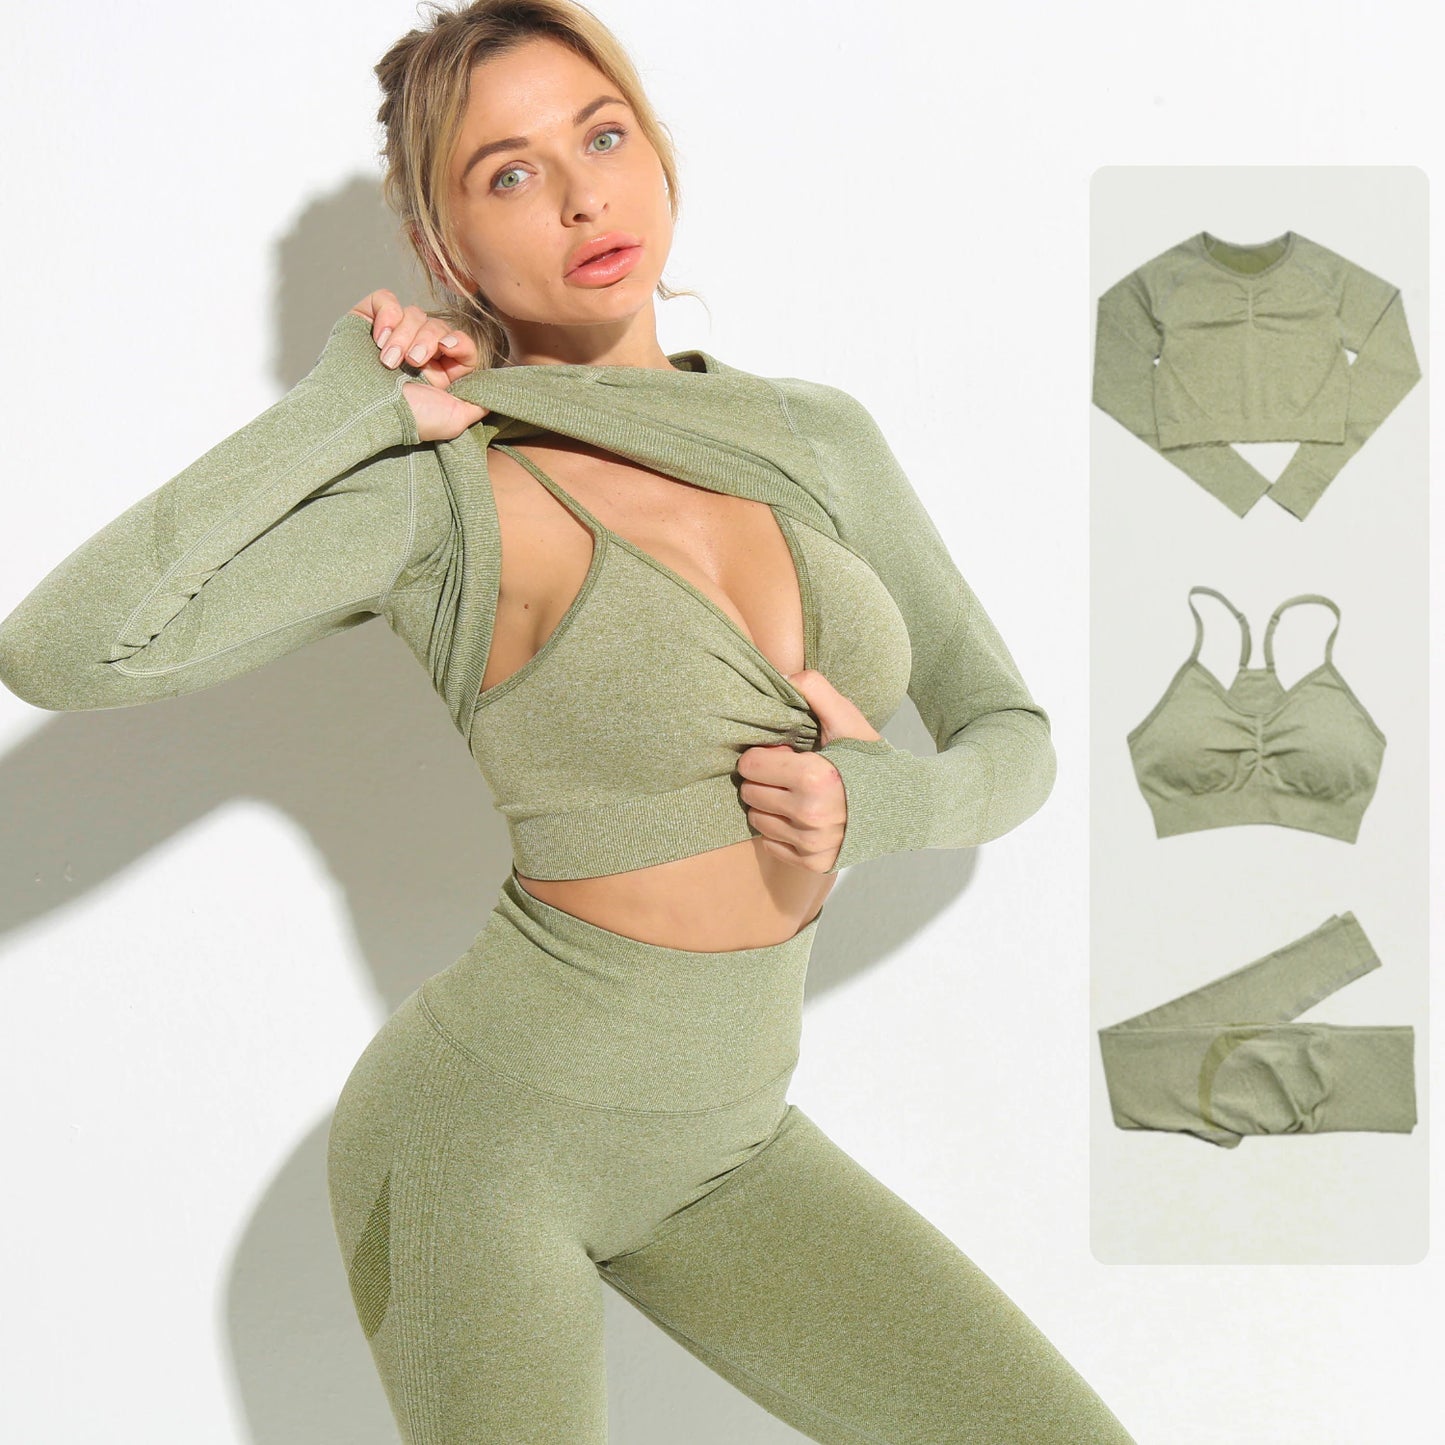 Professional Product Title: "Women's Seamless Yoga Set: High-Performance Workout Sportswear for Gym, Fitness, and Yoga - Long Sleeve Crop Top, High Waist Leggings, and Bra Sports Suits"